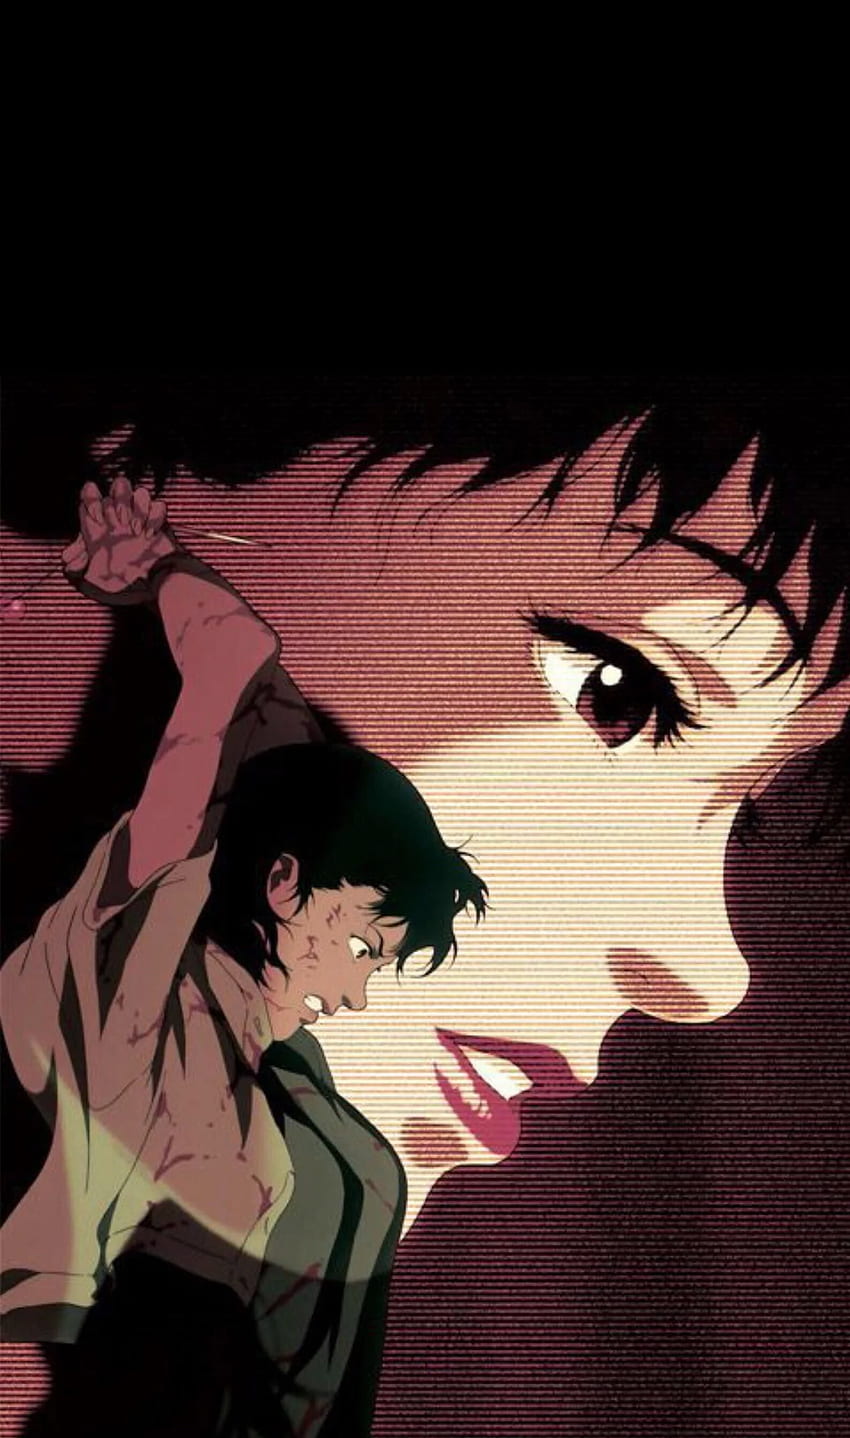 Impressions of Perfect Blue – All the Anime